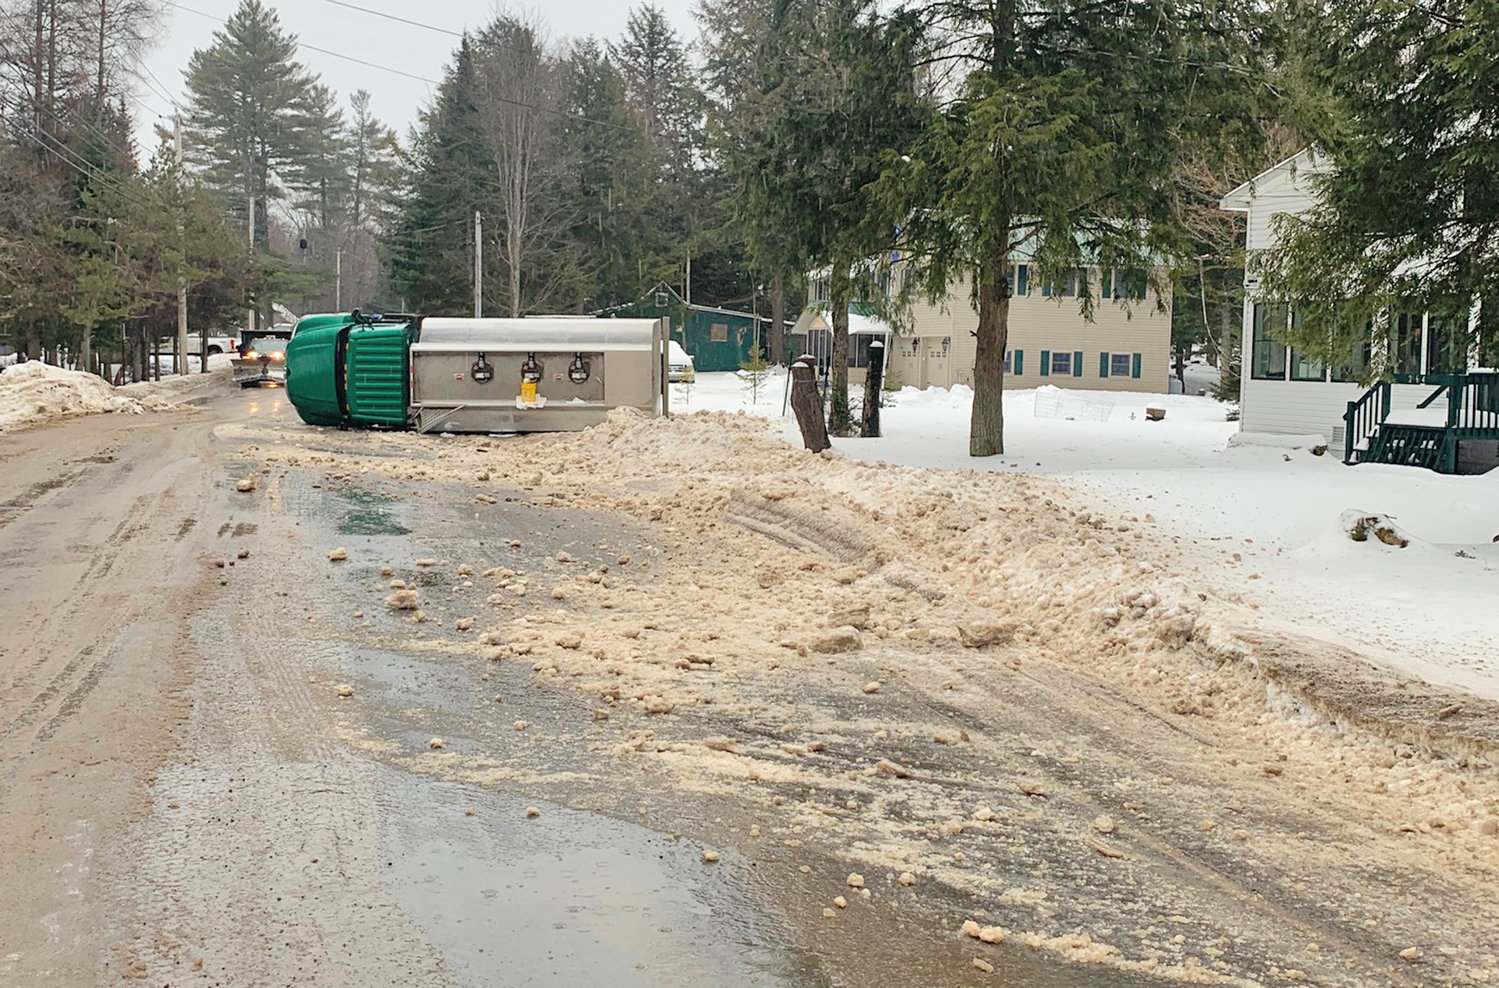 An icy South Shore Road in the Town of Webb in Herkimer County caused this fuel truck to overturn Thursday morning, according to the Webb Police Department. The driver was not injured and the truck was lifted with only a small amount of fuel leaking out, police stated.